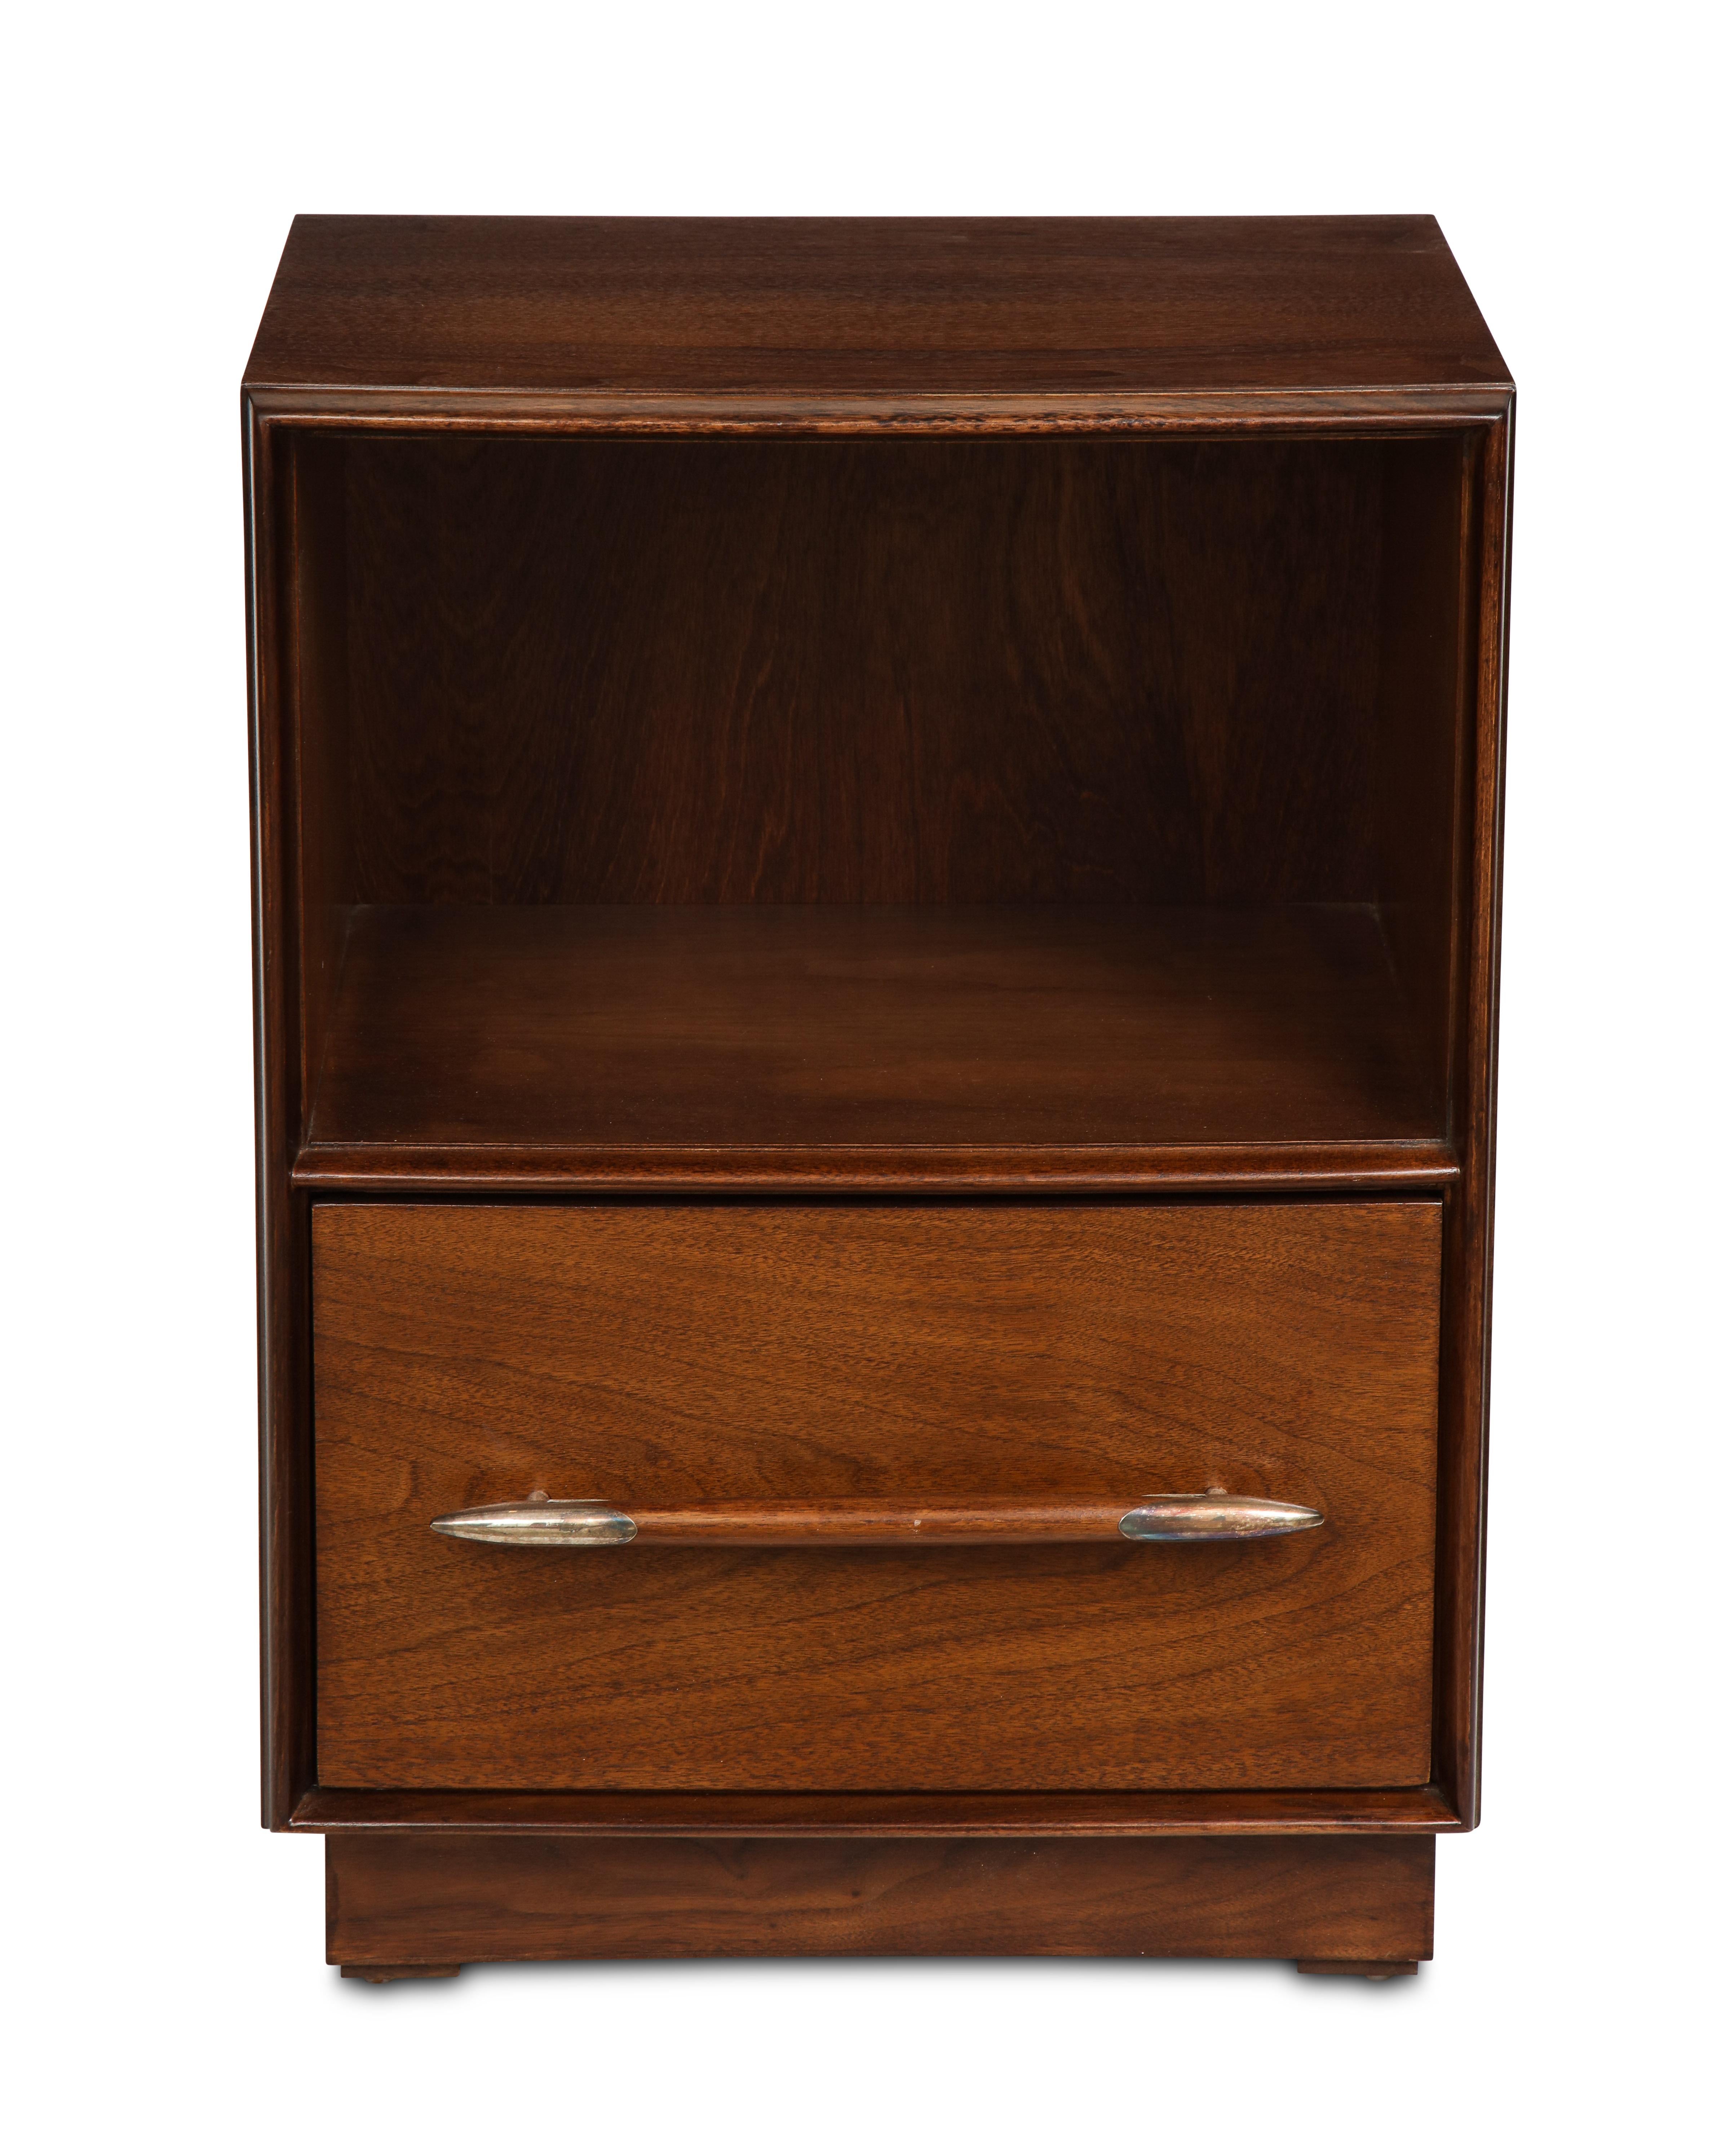 Walnut with polished nickel details. Having an open interior with one lower drawer, with the original label inside the drawer.
  